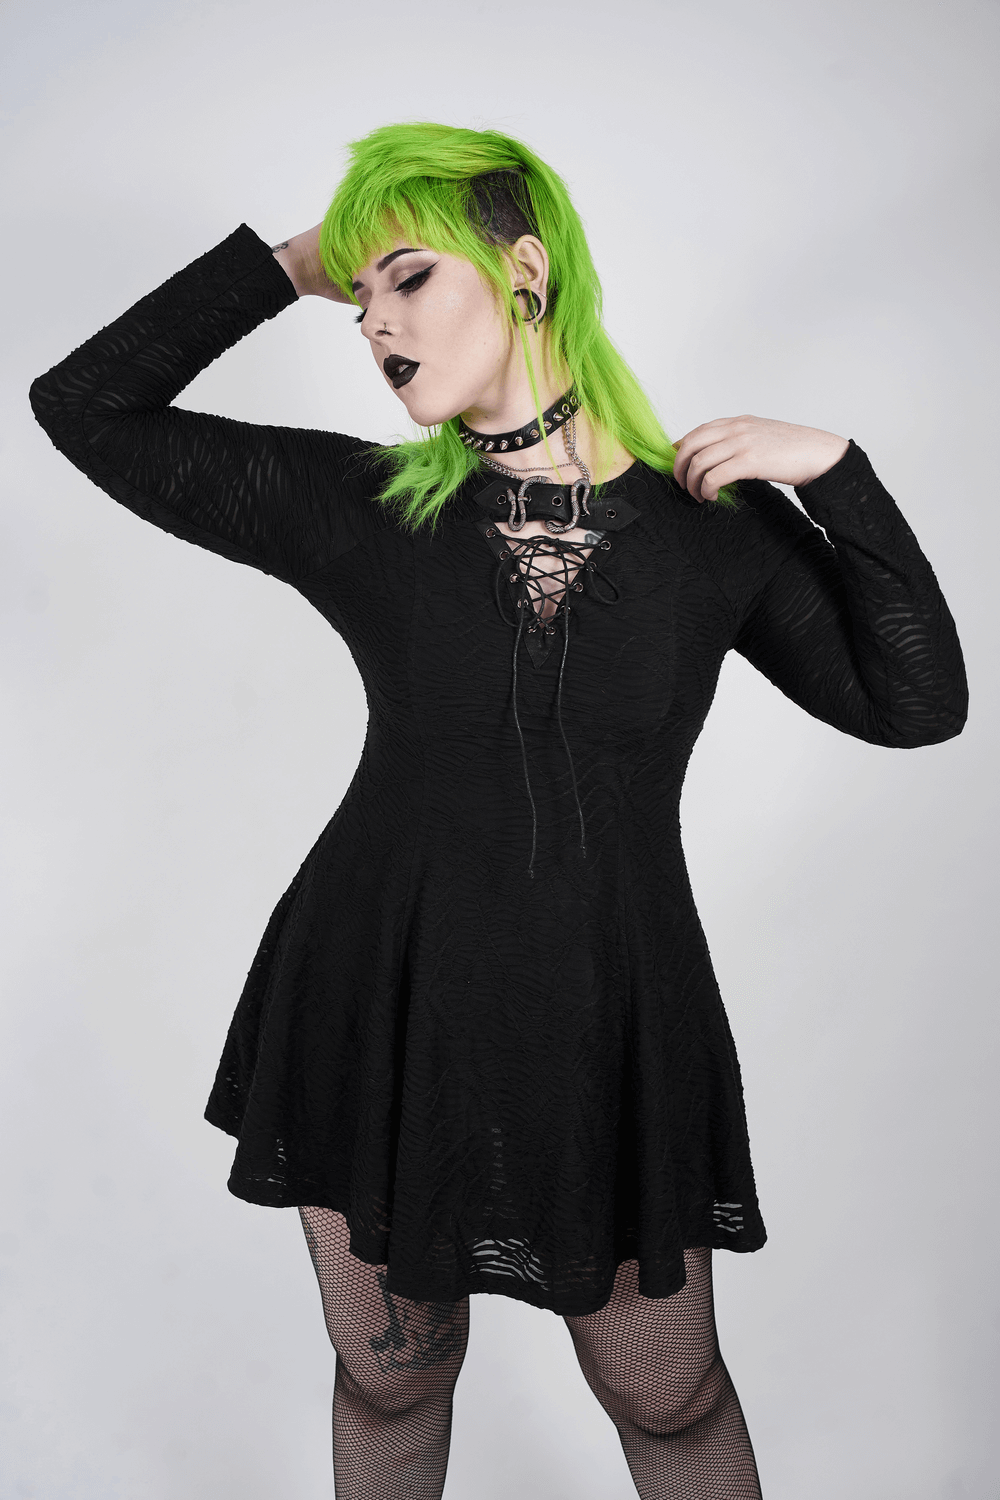 Edgy Gothic V-Neck Skater Dress with Metal Accents - HARD'N'HEAVY